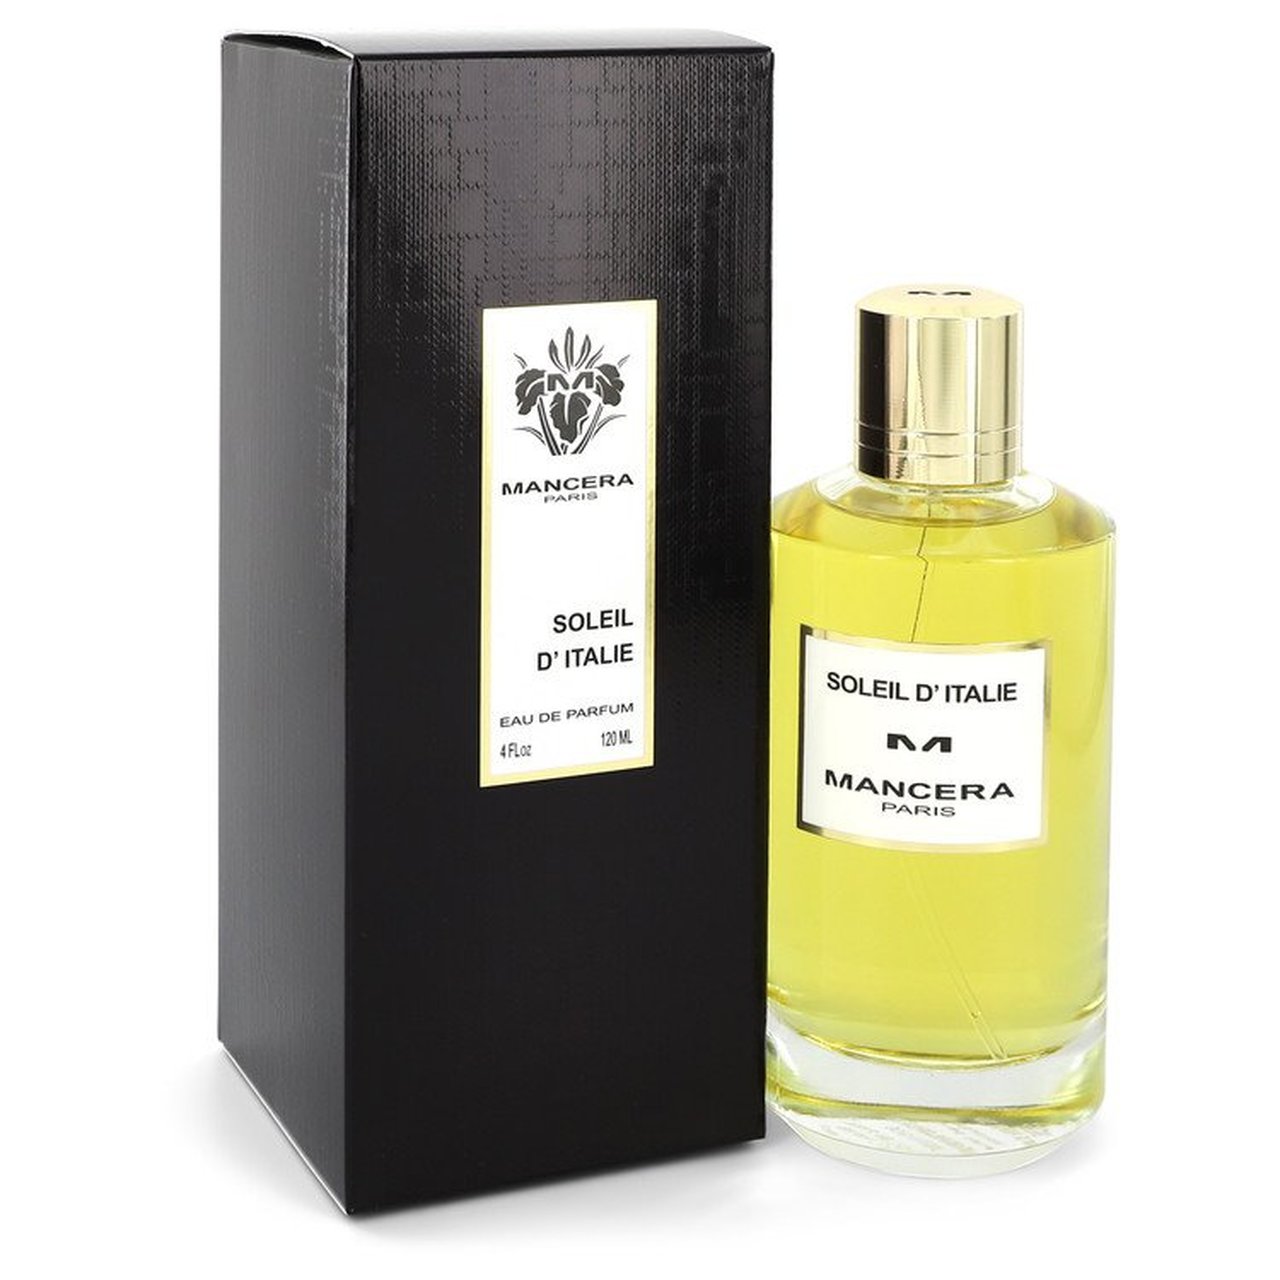 A modern fragrance inspired by an Italian journey that combines the tonic notes of sun citrus, with the sweetness notes of Rose, Vetiver and Amber to an aquatic harmony of extreme freshness. 4.06 oz. Made in France.

TOP NOTES
Bergamot
Bitter orange
Mandarin
Lime
Pink pepper
Cardamom

HEART NOTES
Aquatic accord
Rose
Patchouli

BASE NOTES
Vetyver
Cedarwood
Gaiacwood
Amber
White Musk